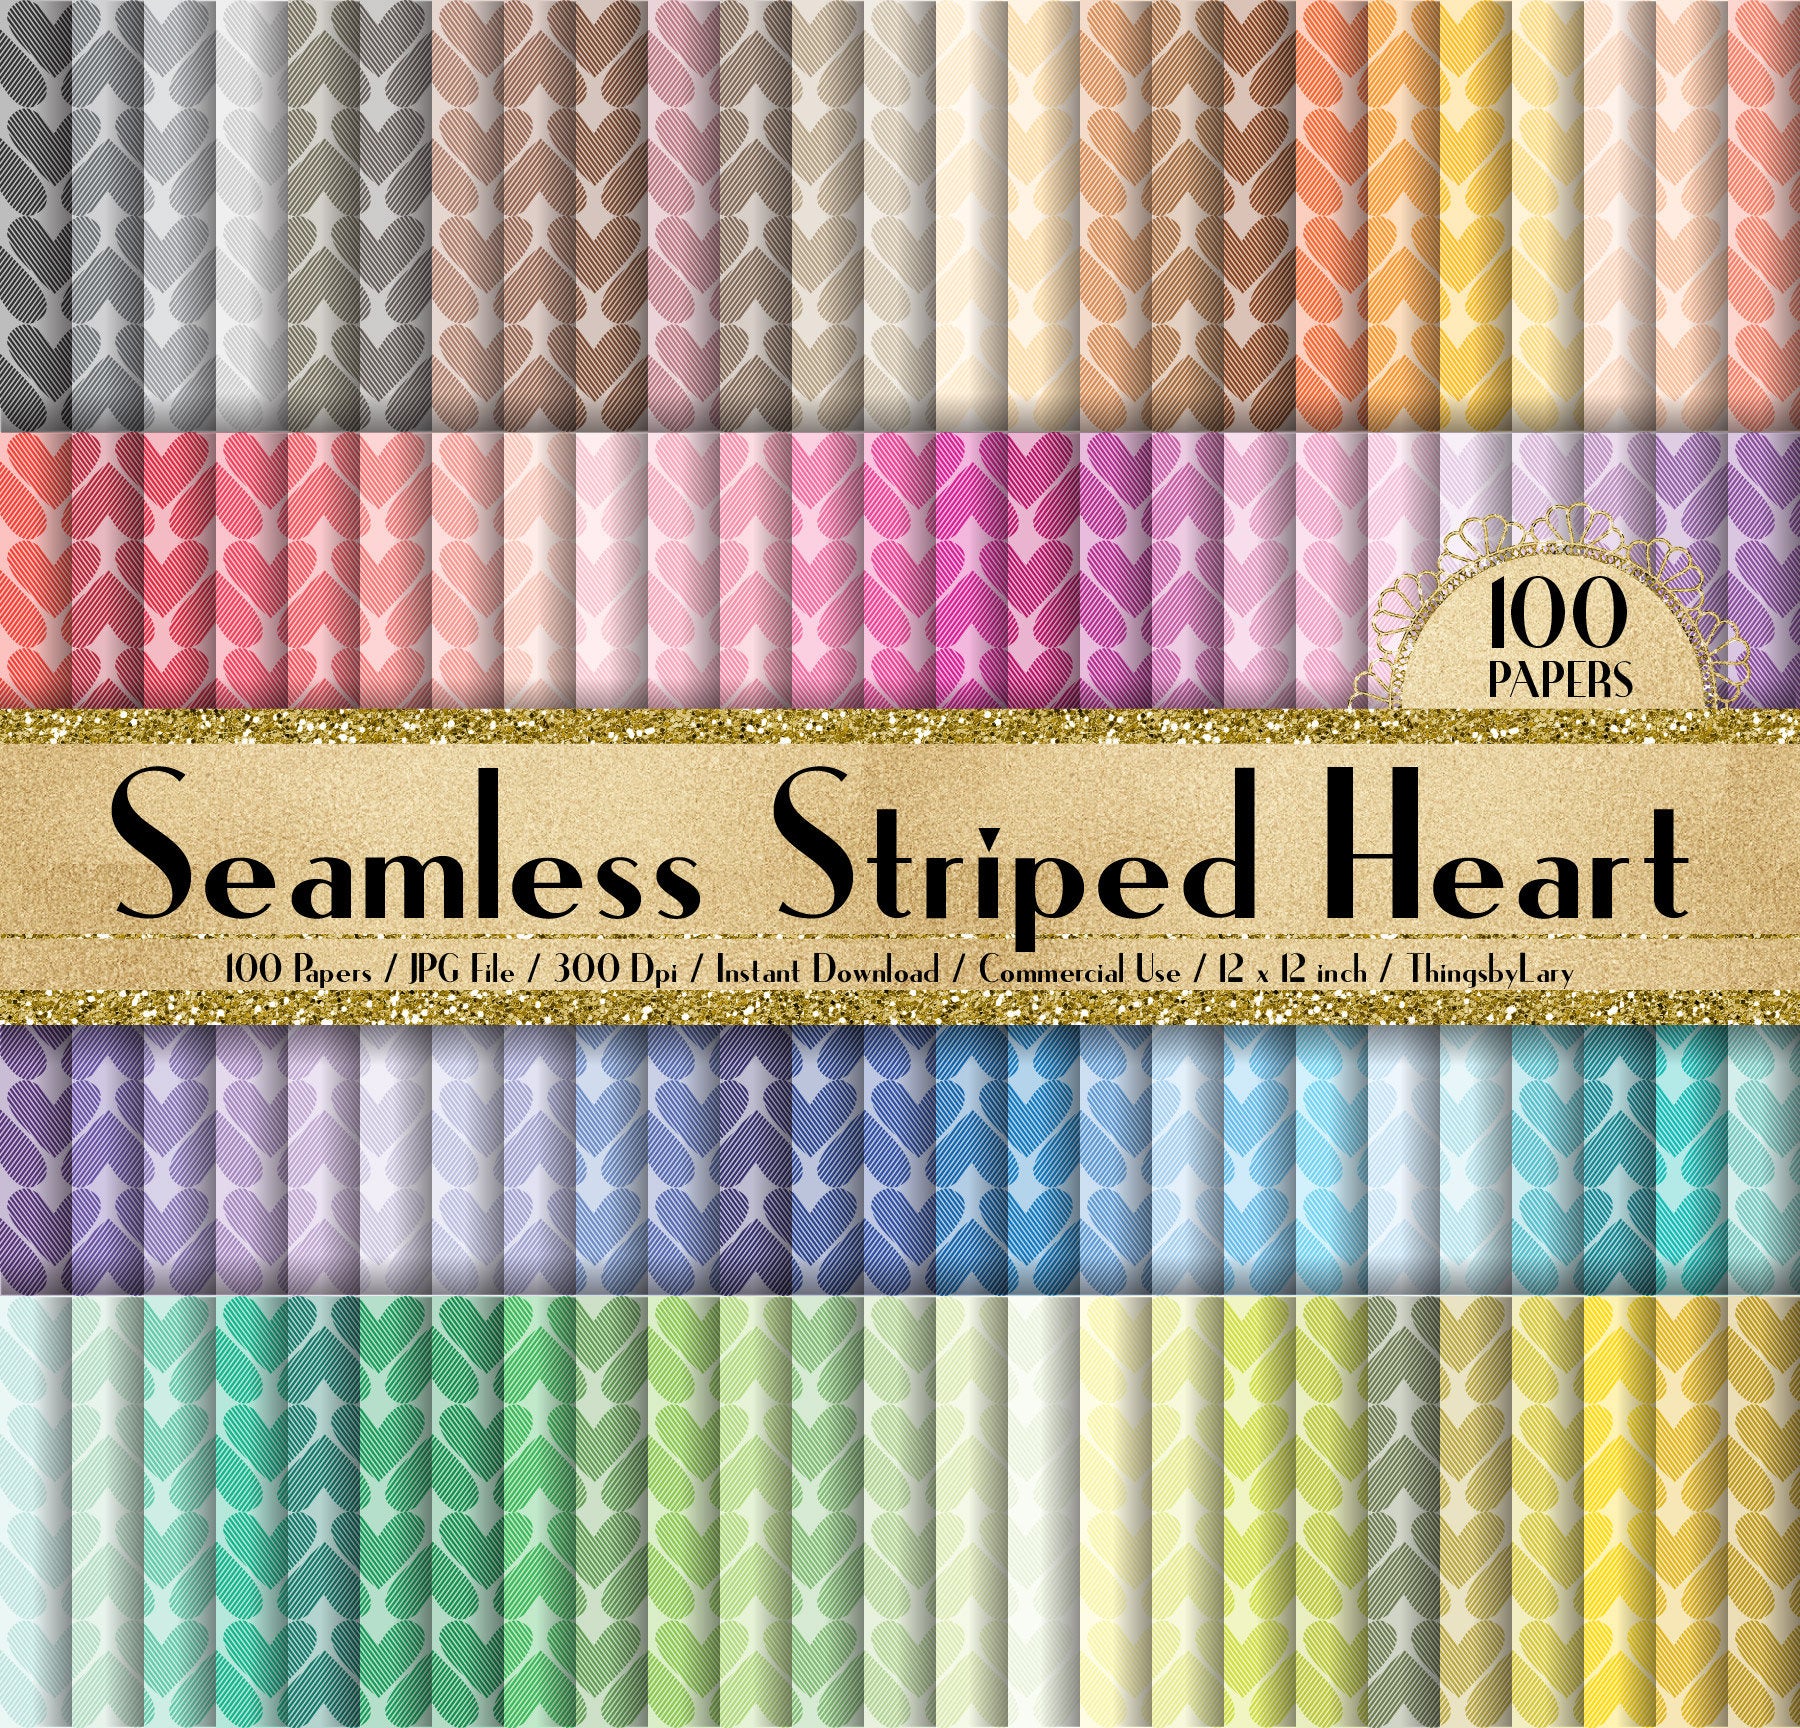 100 Seamless Striped Heart Papers 12 inch 300 Dpi Instant Download Commercial Use, Planner Paper, Scrapbooking Romantic Kit, Seamless